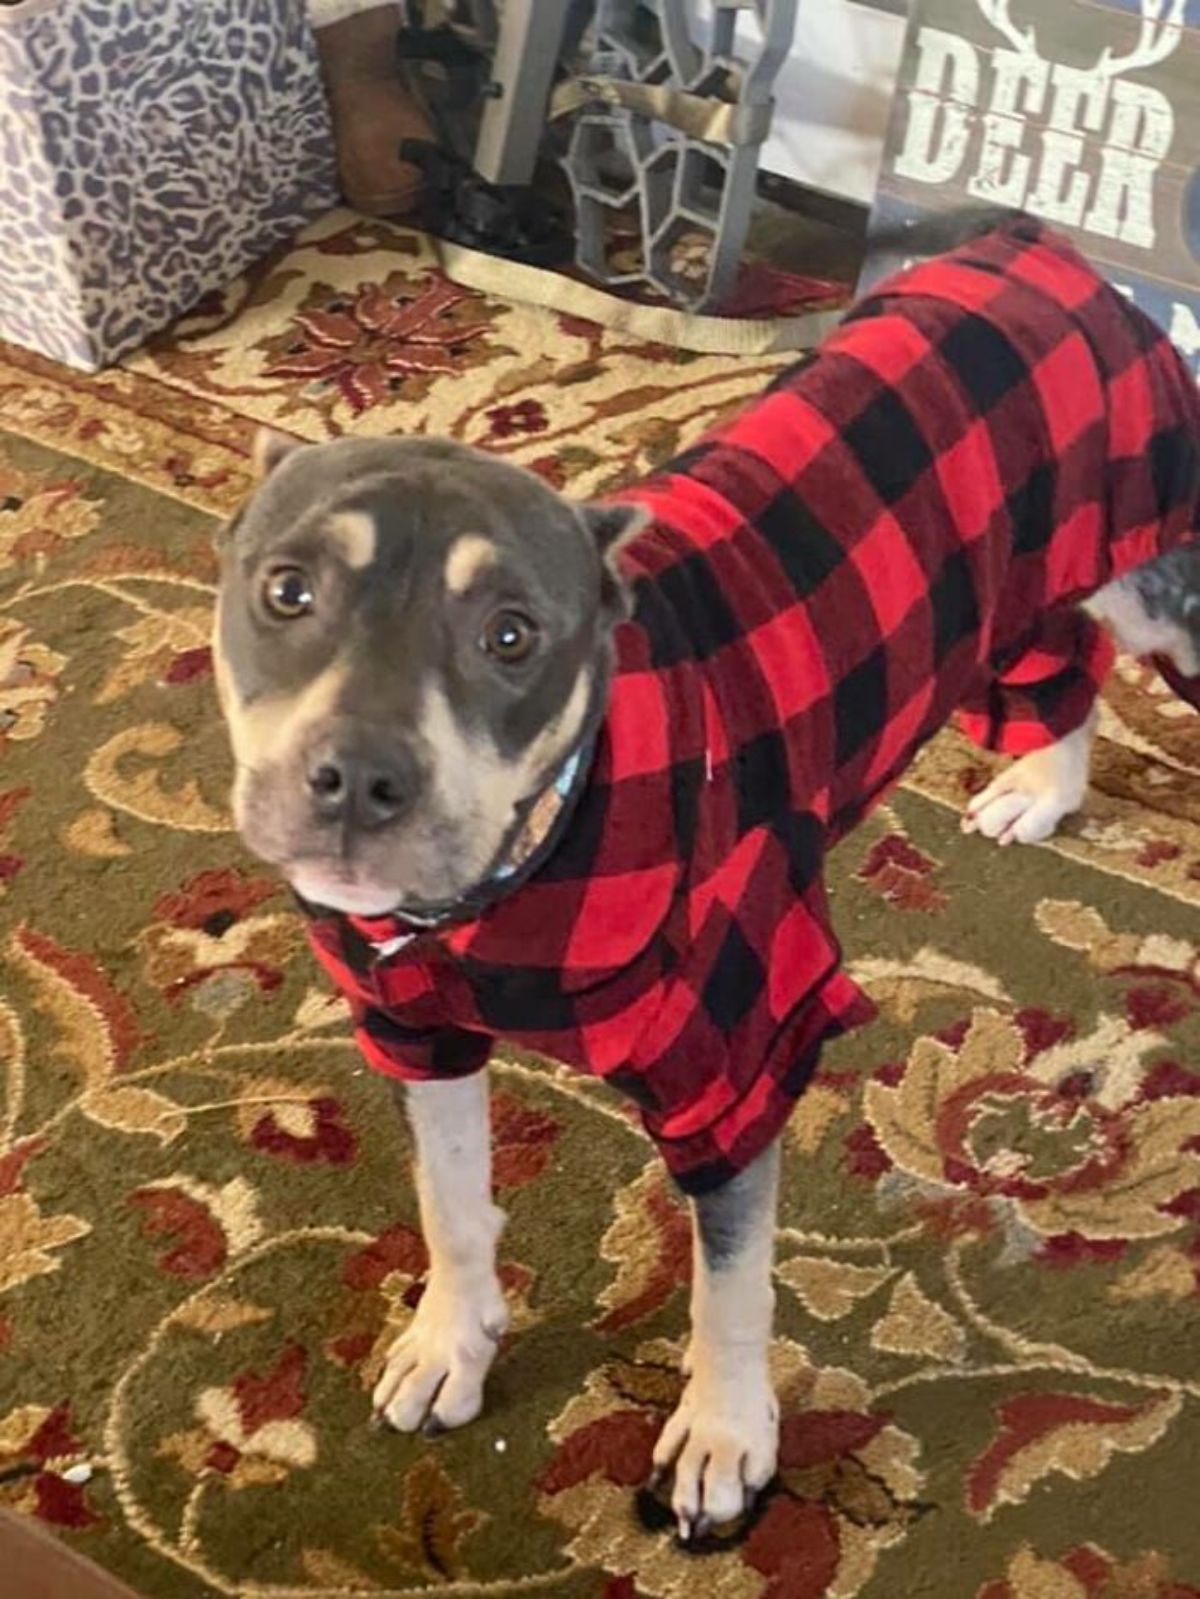 thin brown pitbull in a red and black plaid shirt standing on a patterned carpet